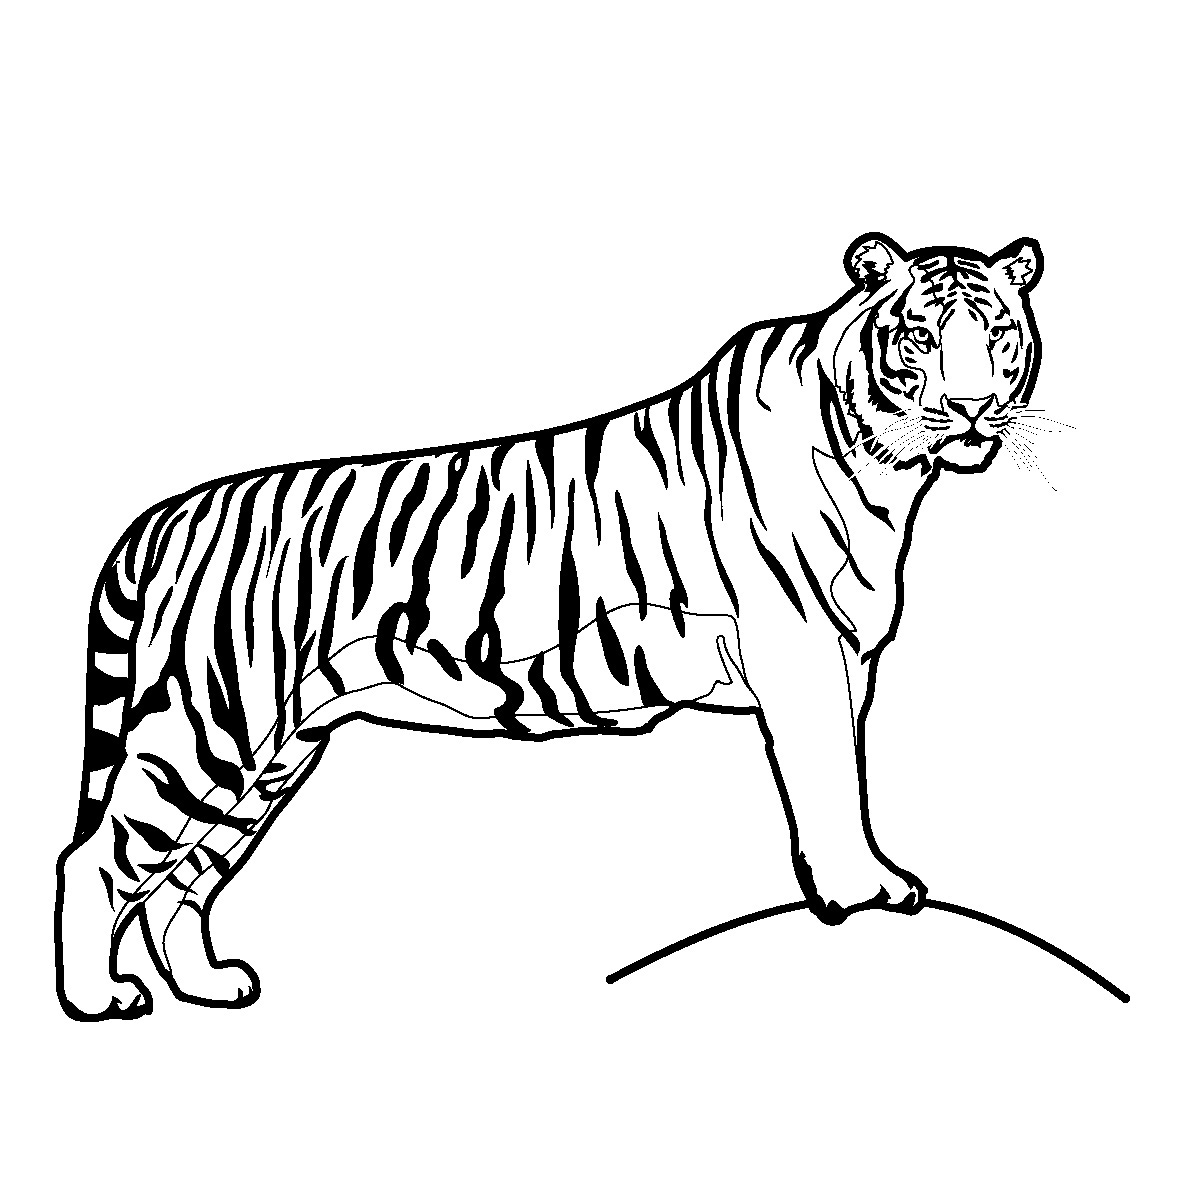 CLIP ART: BABY ANIMALS: TIGER | Clipart Panda - Free Clipart Images